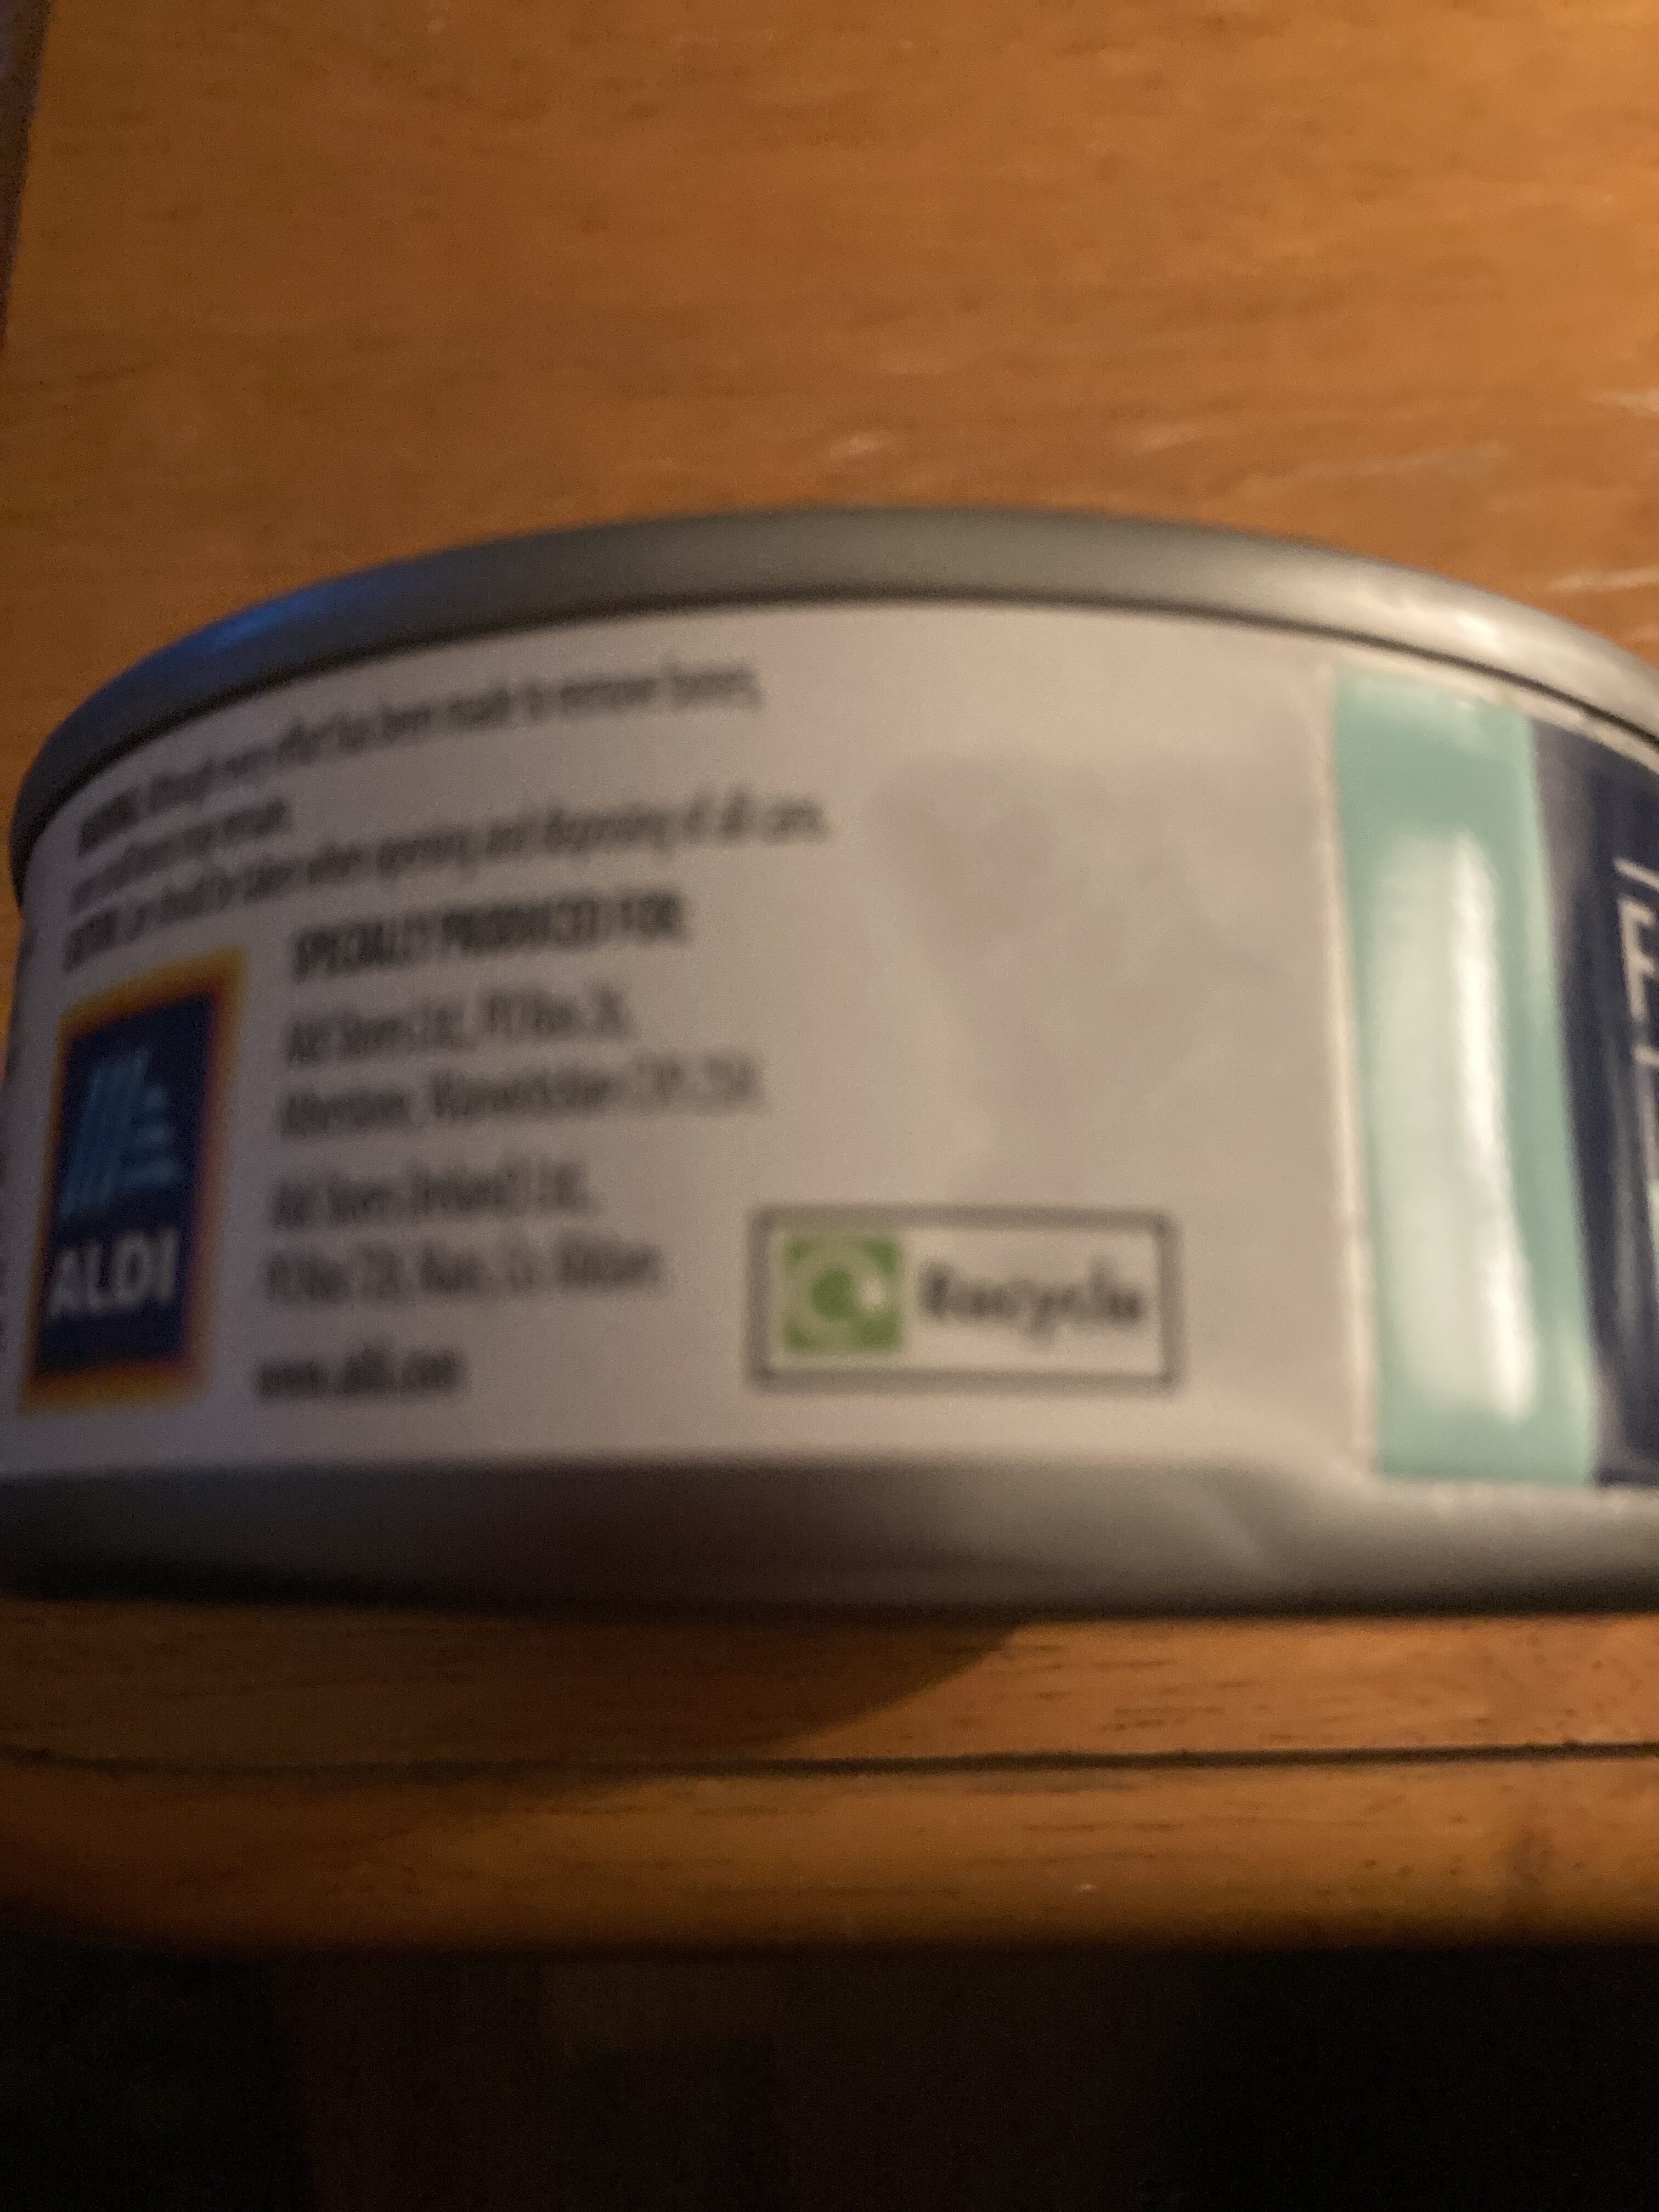 Tuna chunks in brine - Recycling instructions and/or packaging information